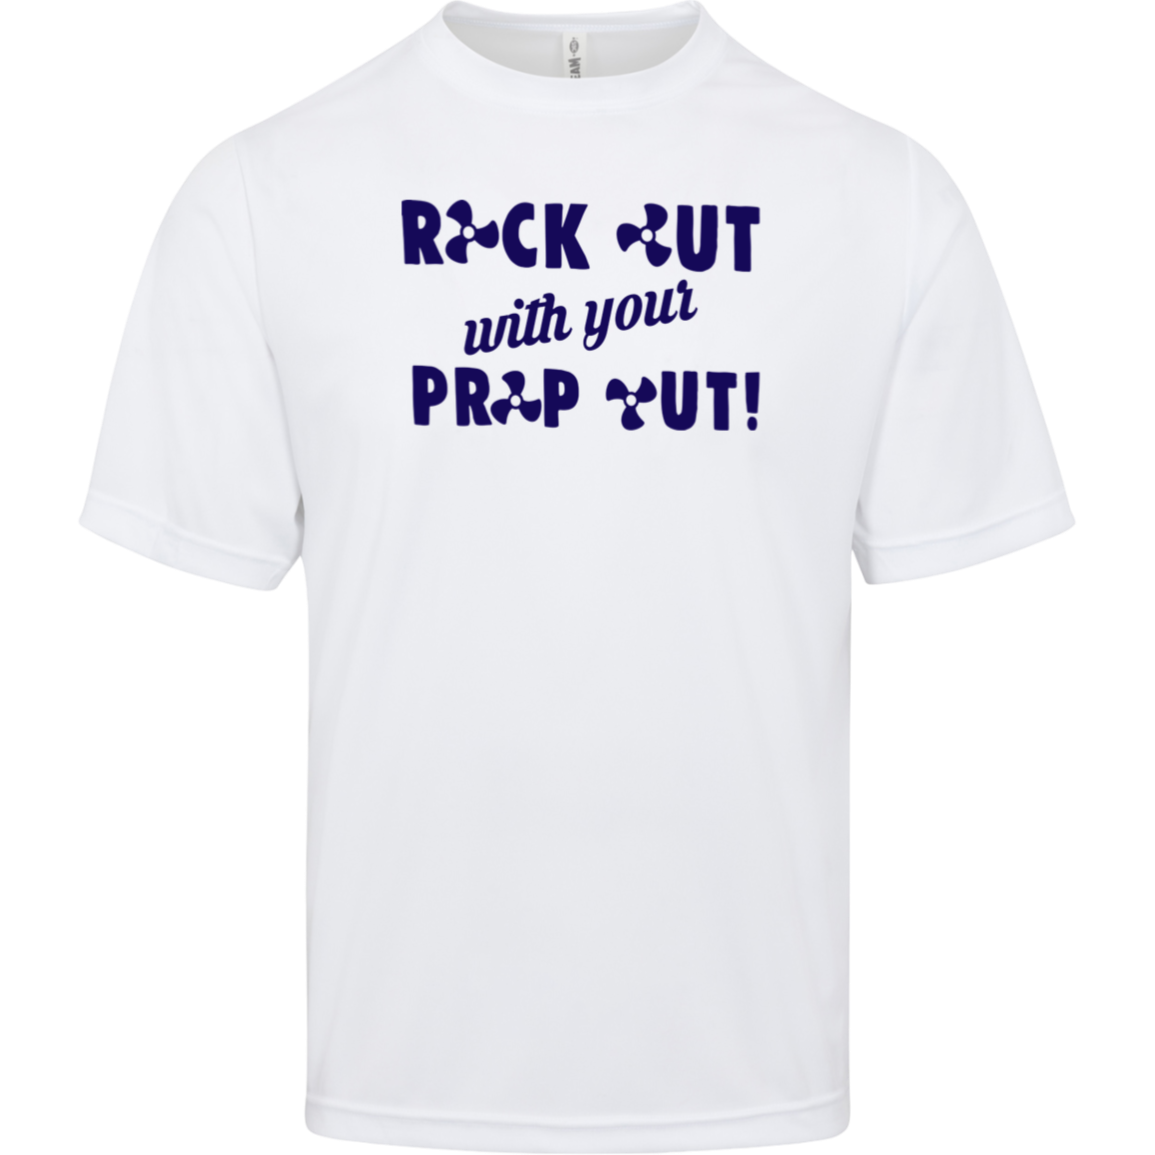 ***2 SIDED***  HRCL FL - Navy Rock Out with your Prop Out - - 2 Sided - UV 40+ Protection TT11 Team 365 Mens Zone Tee